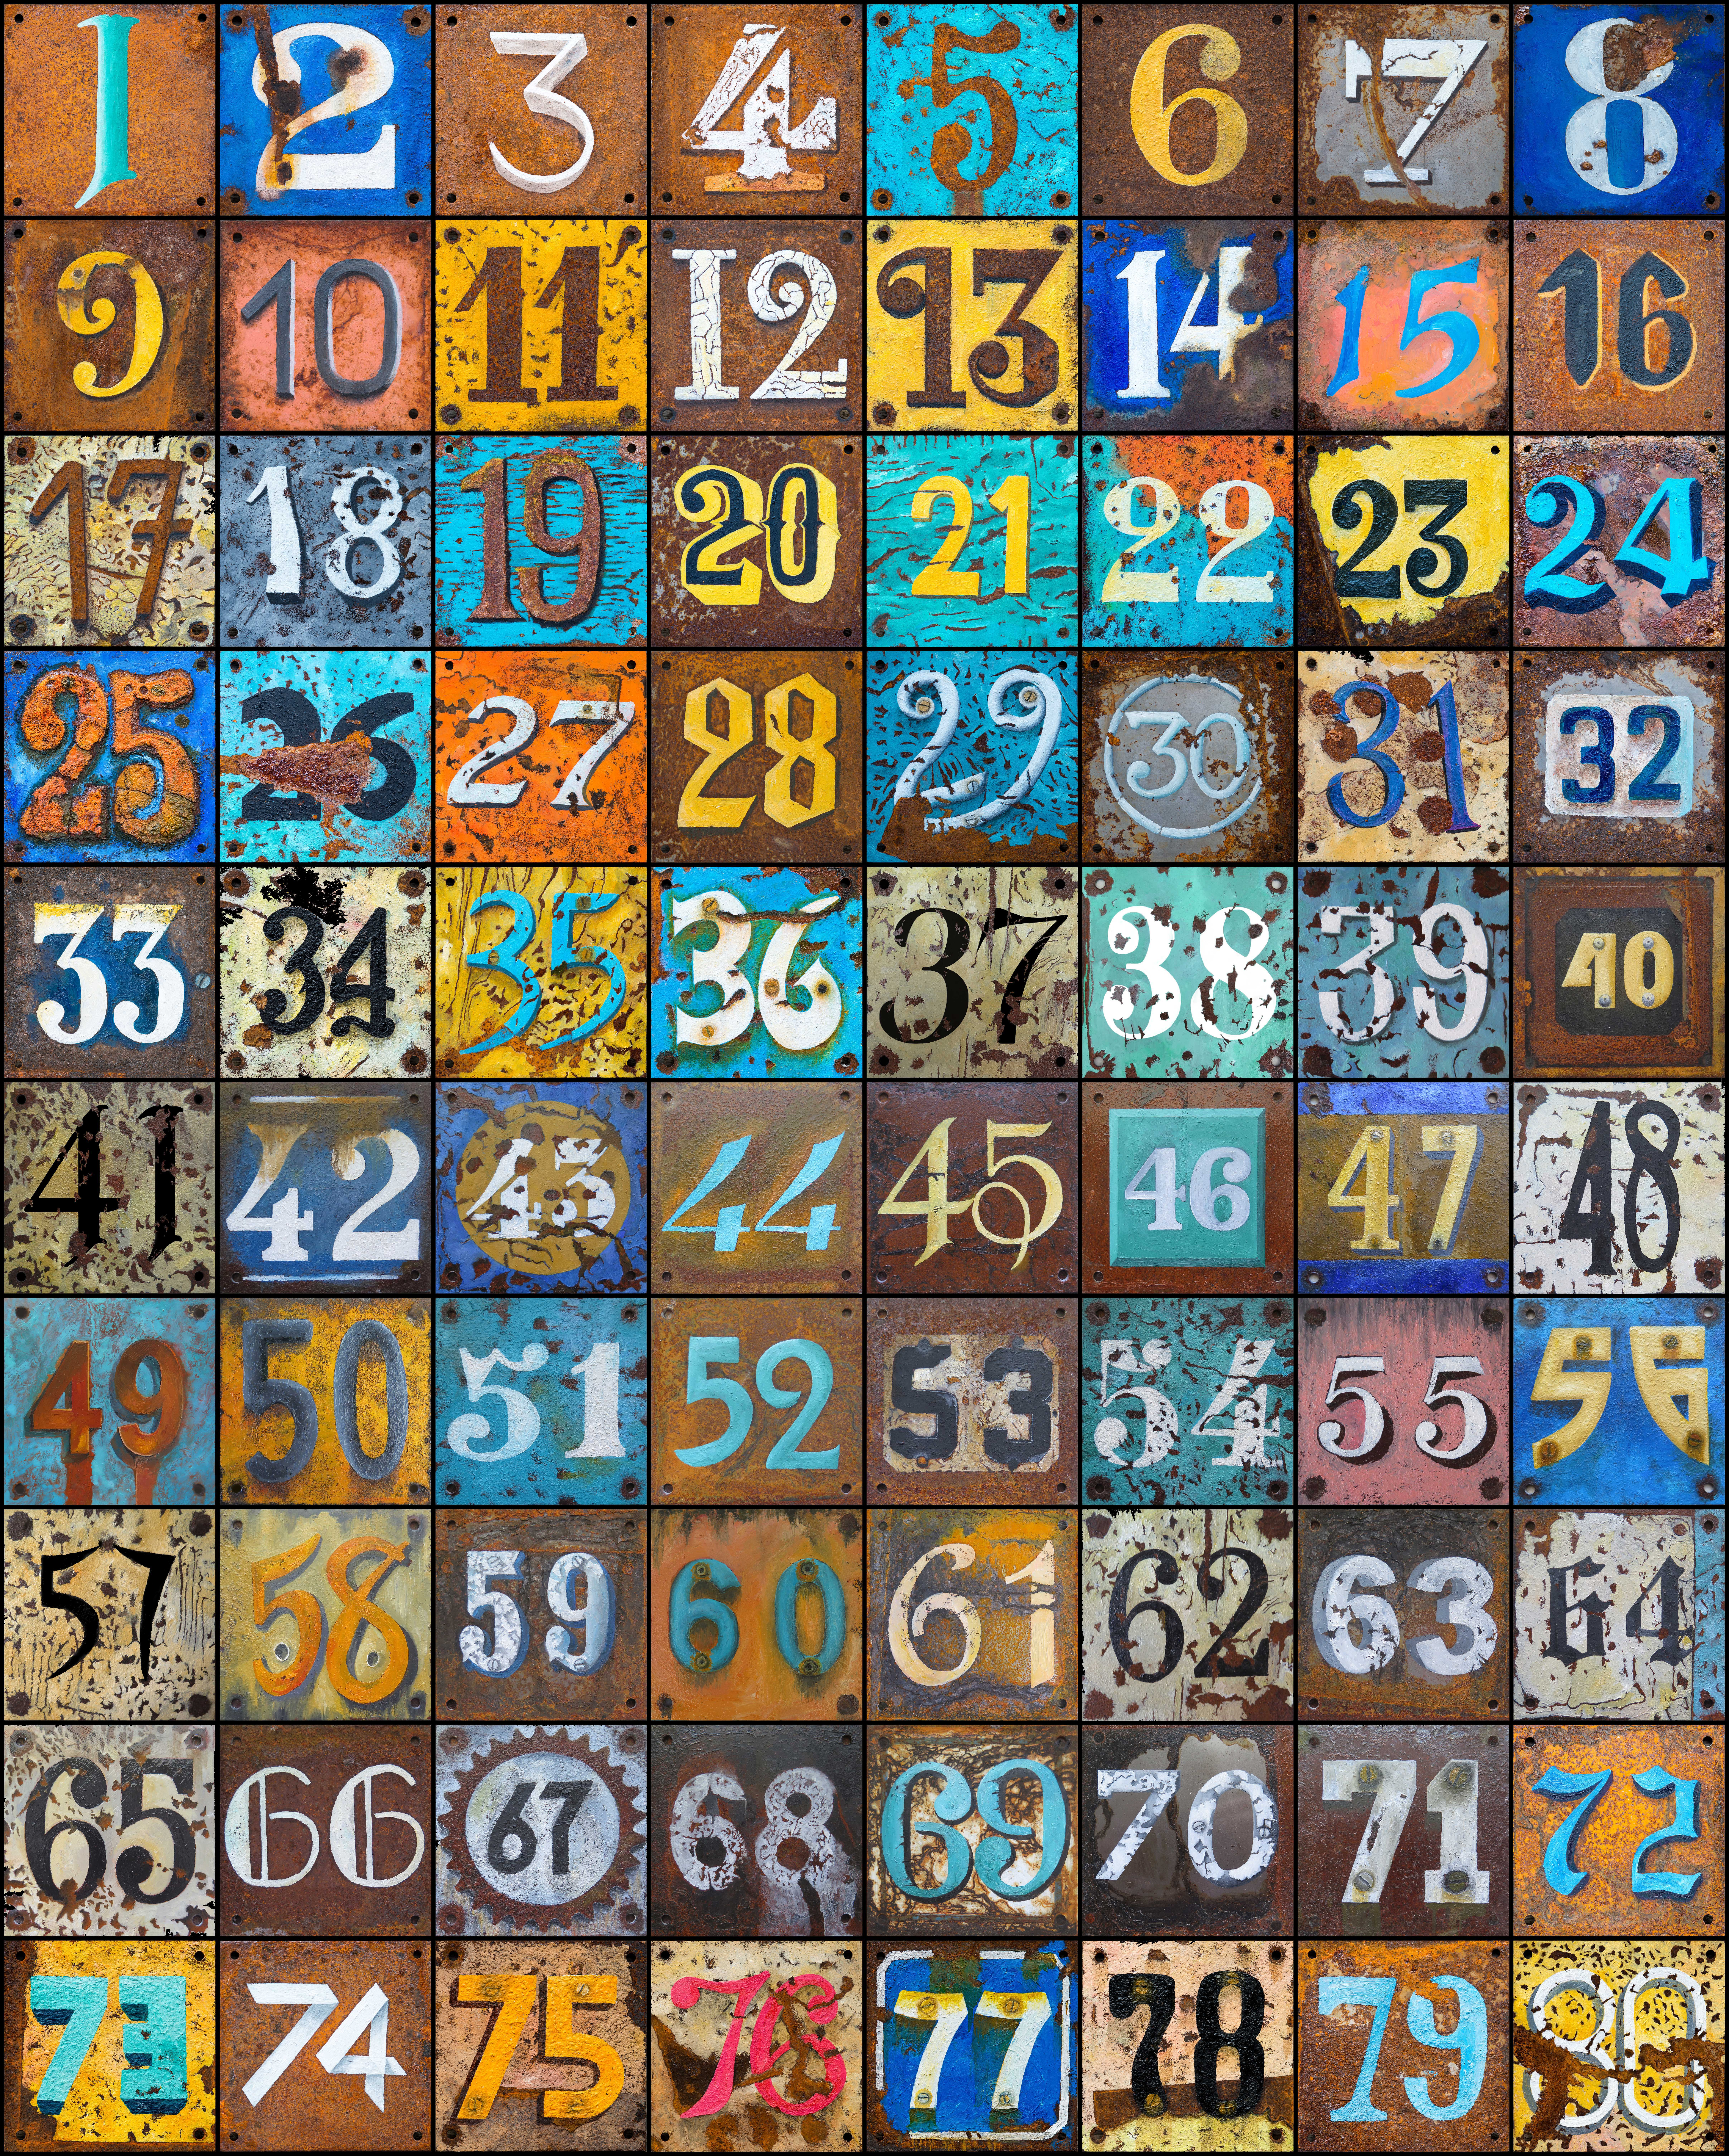 multicolored, motley, rust, texture, numbers, textures phone background